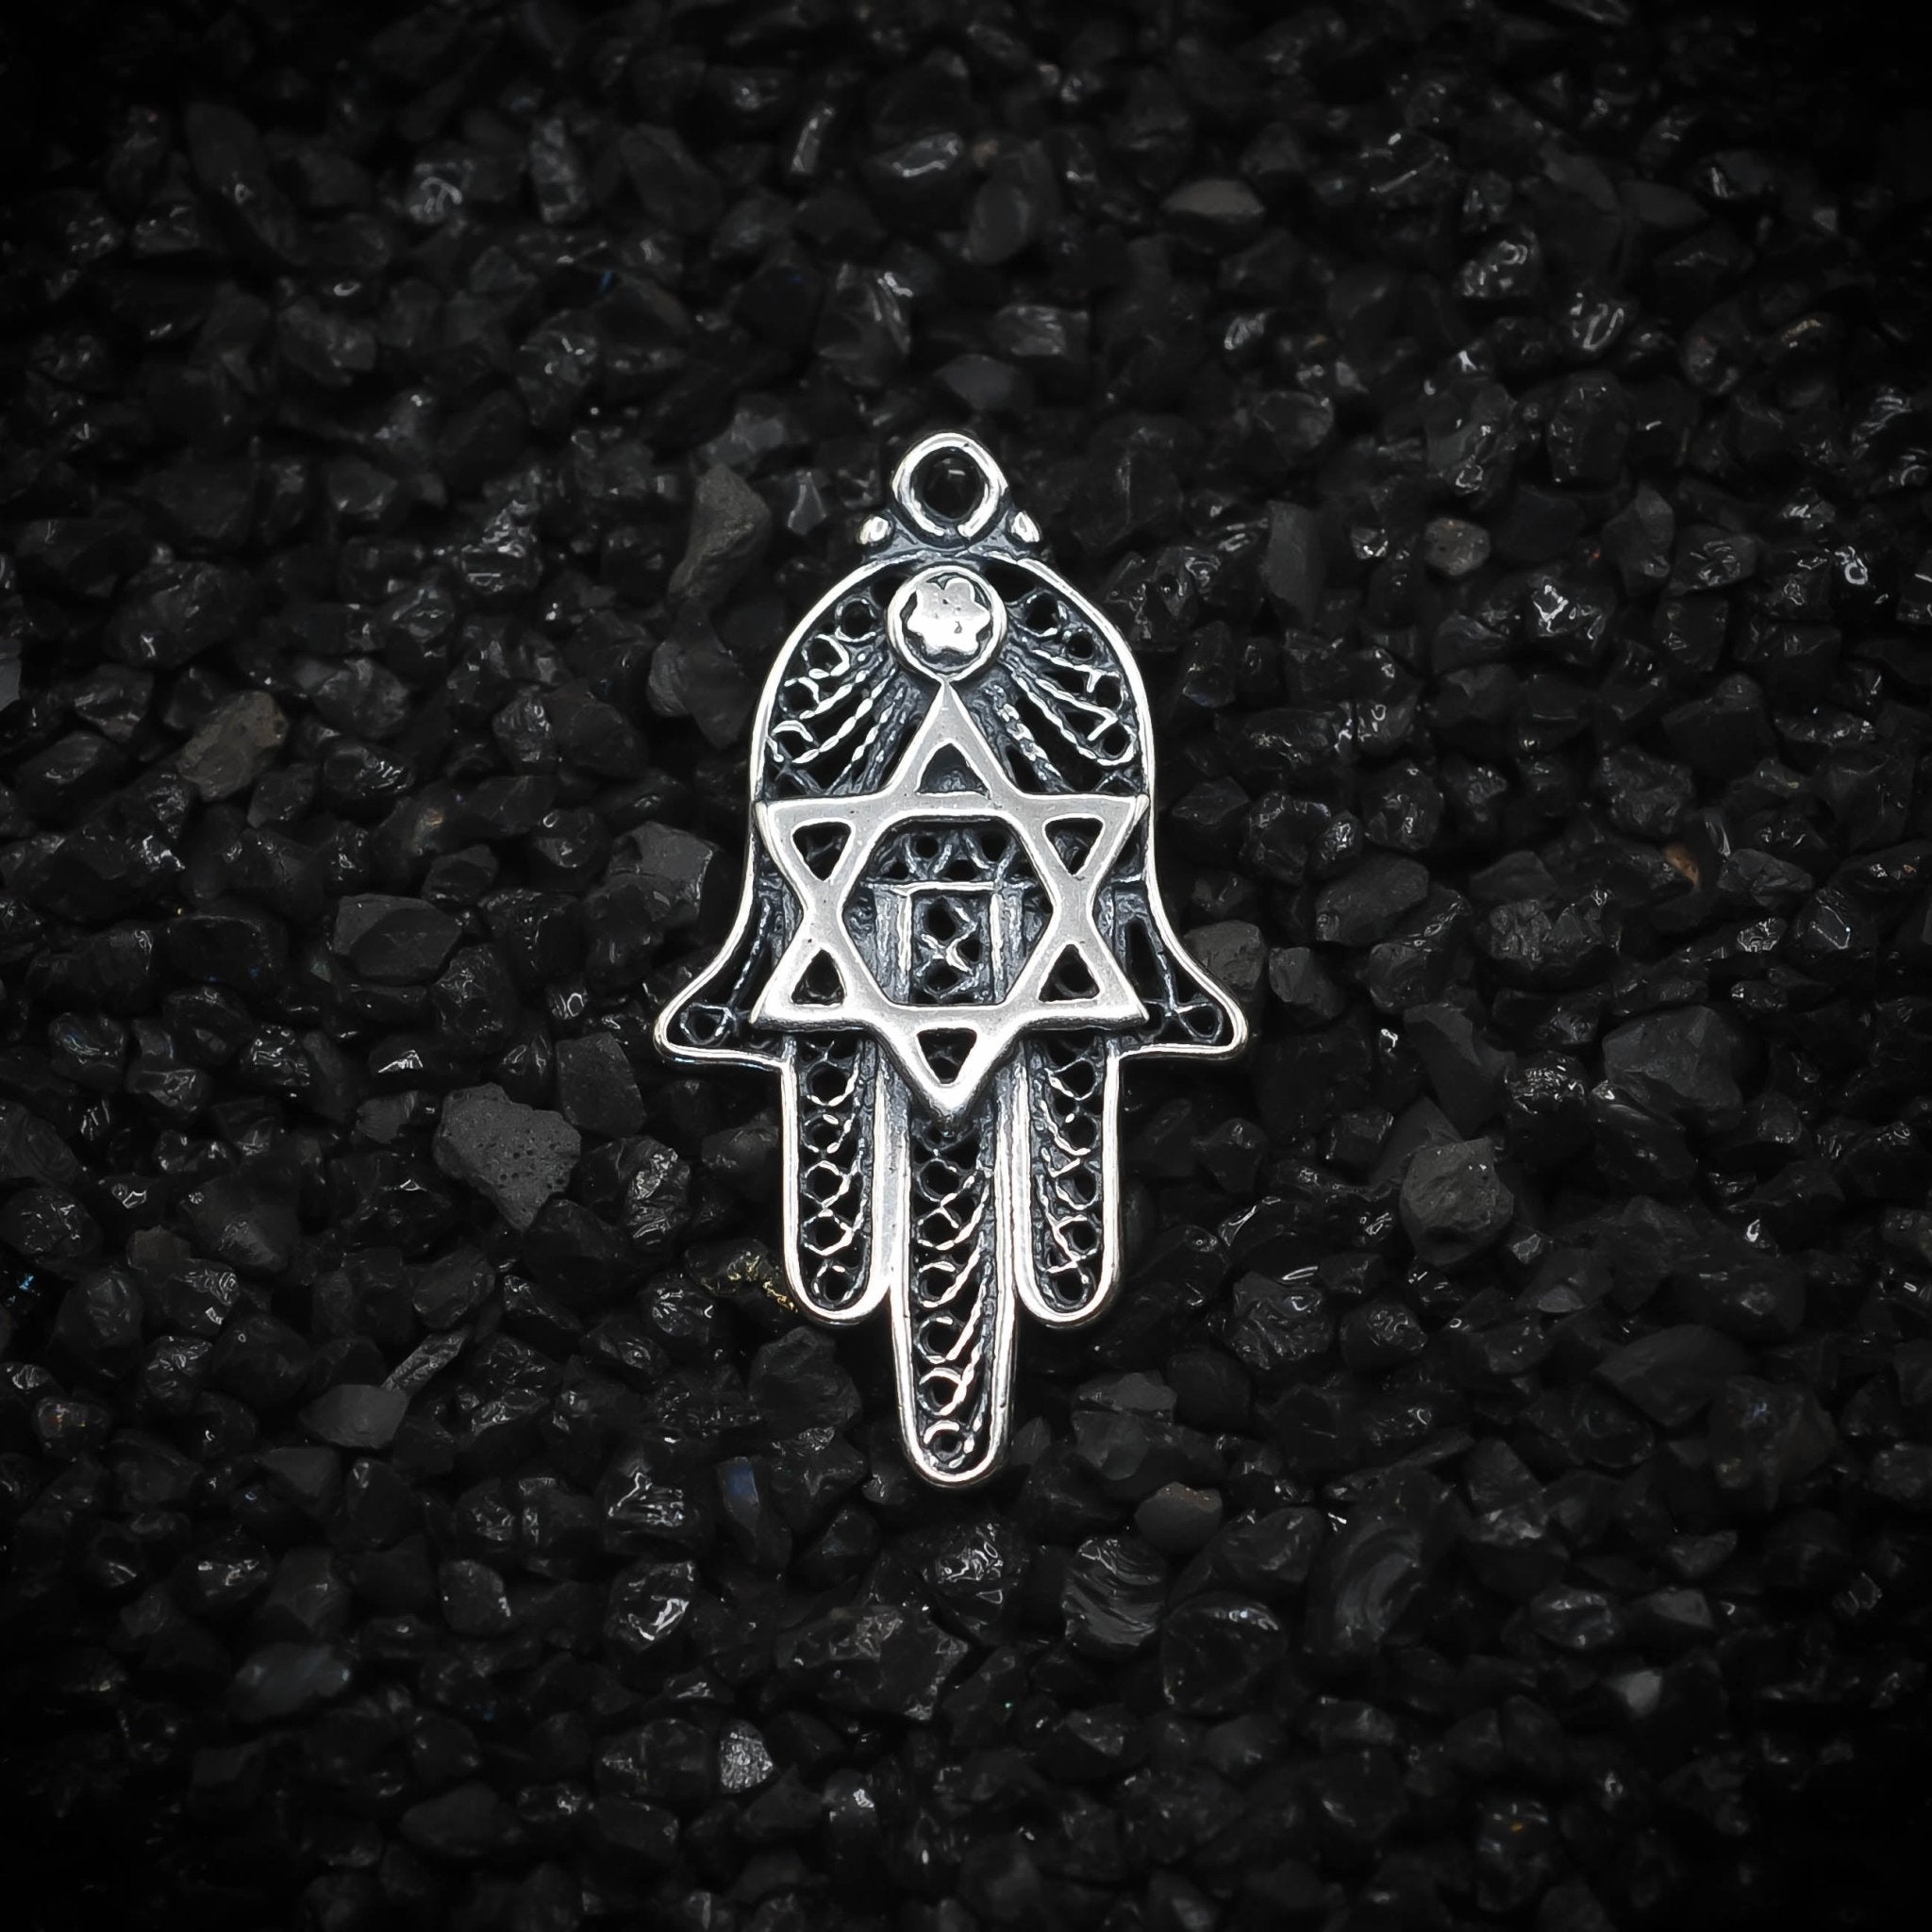 Hamsa Hand Amulet Mesh Hand of God Charm | 925 Sterling Silver, Oxidized or 18K Gold Plated | Jewelry Making Pendant - HarperCrown